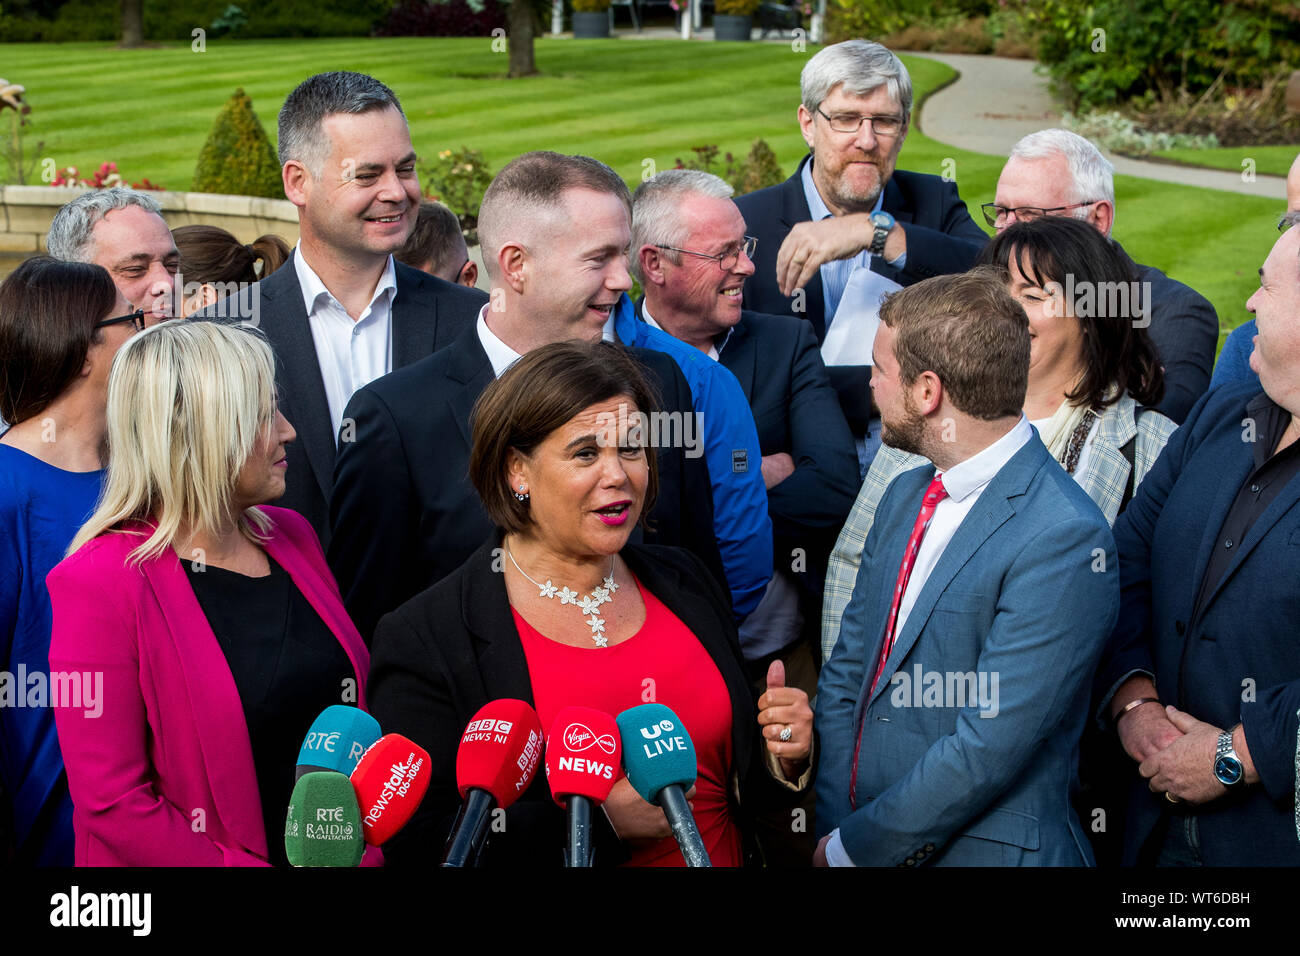 Sinn Fein president Mary Lou McDonald motions to party colleague John O'Dowd (rear of crowd with hand motioning) during a doorstep with media before a party meeting at the Carrickdale Hotel and Spa in Dundalk. Stock Photo